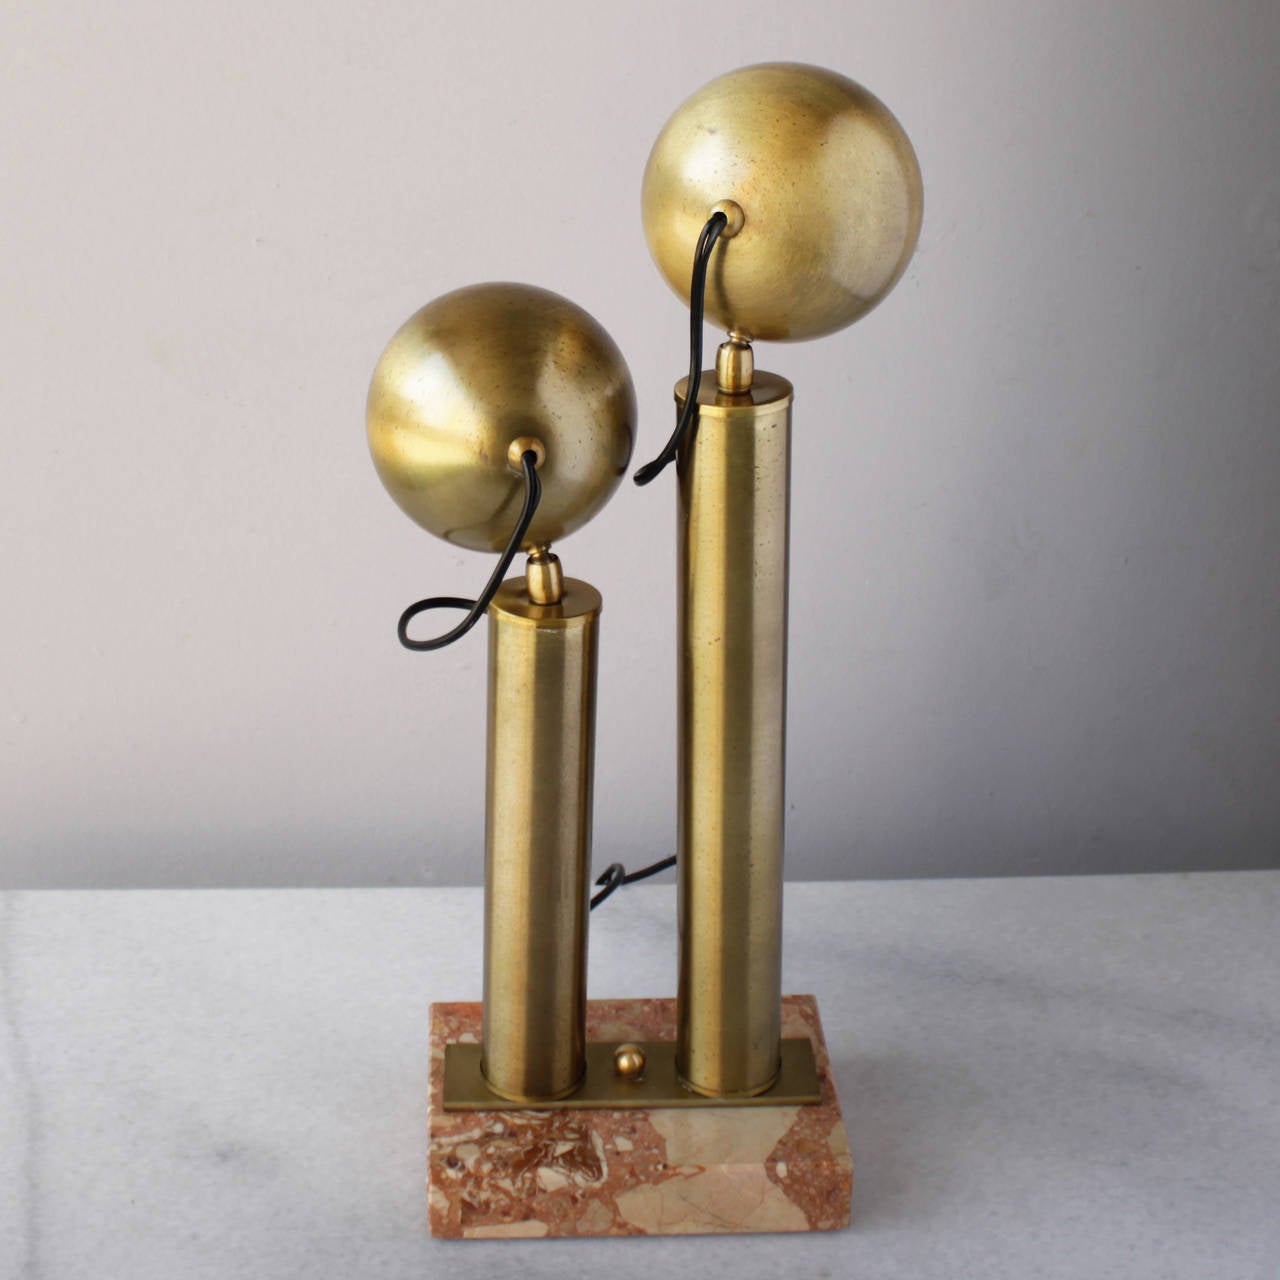 Italian modernist table lamp in the style of Angelo Lelli. This architectural lamp has two adjustable spotlights on a marble base.